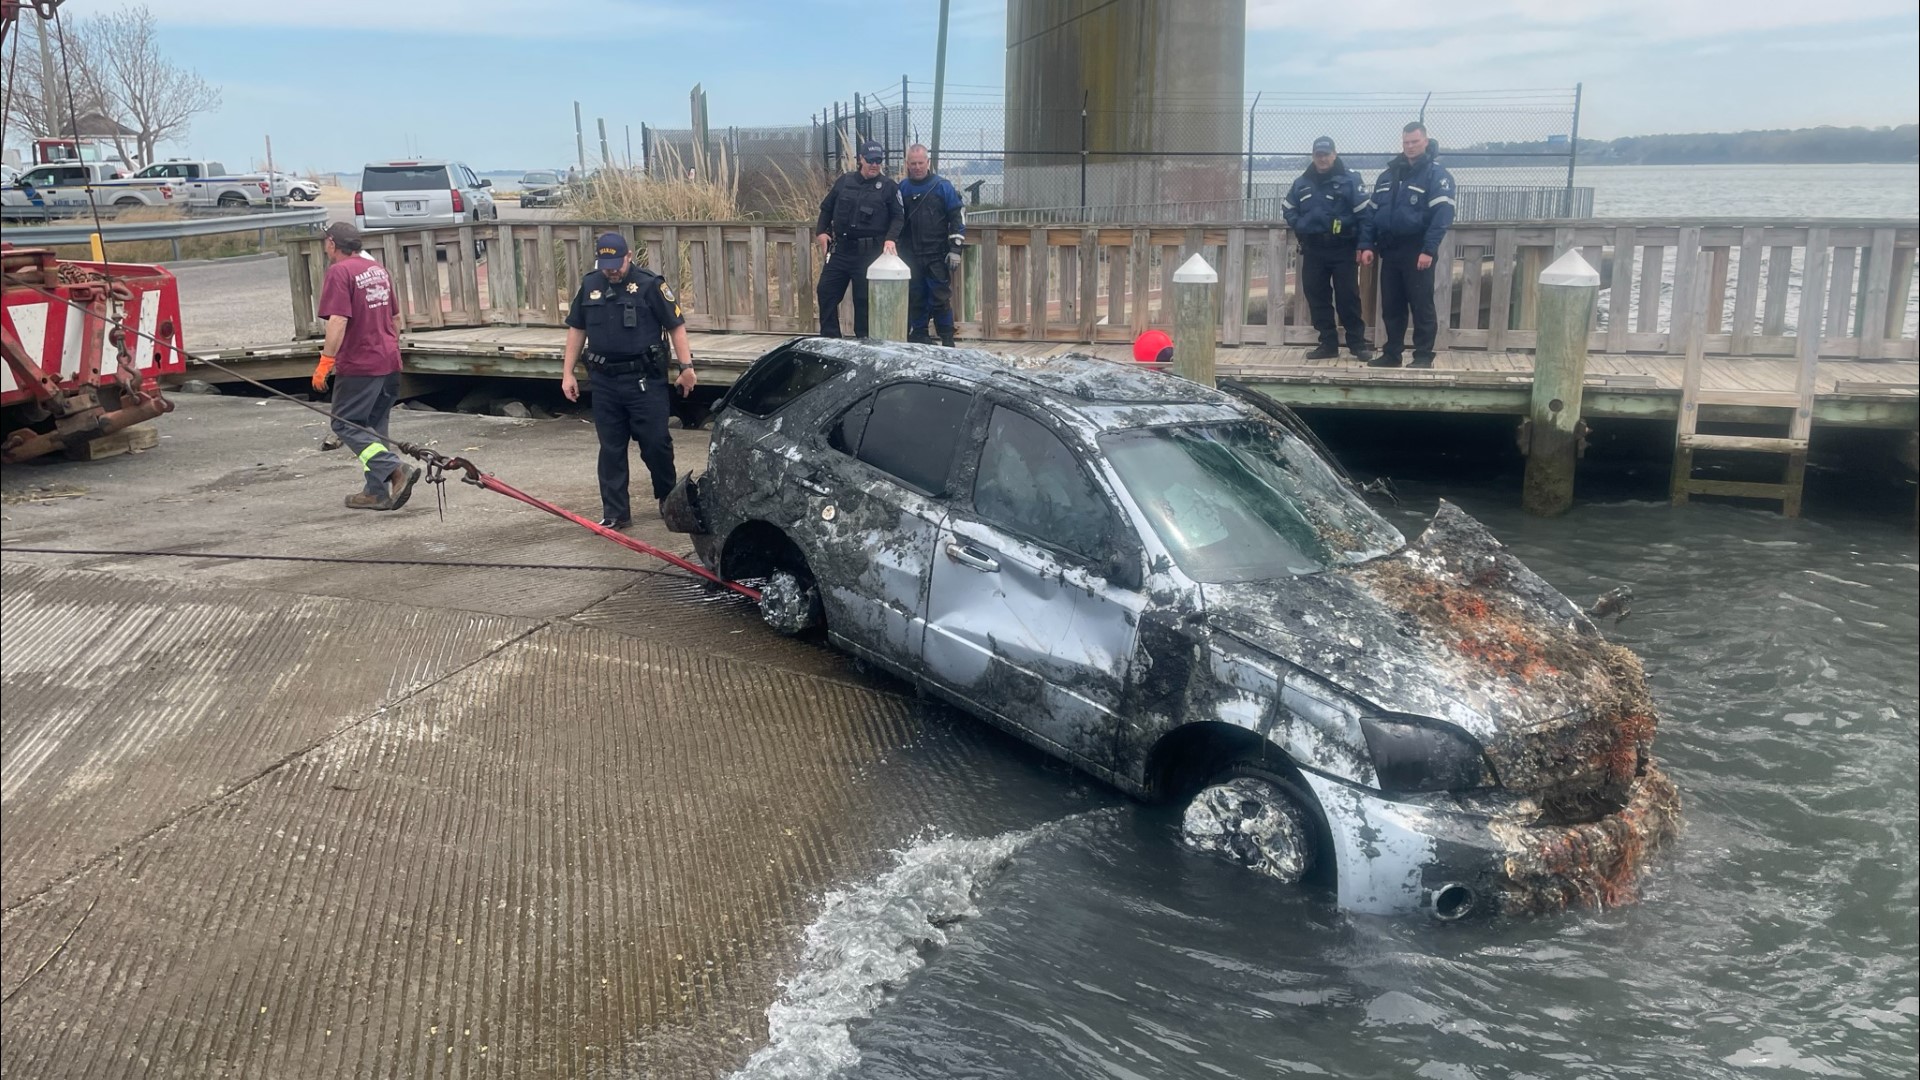 The Kia Sorento ran into the water near Gloucester Point after the driver left the vehicle in drive.